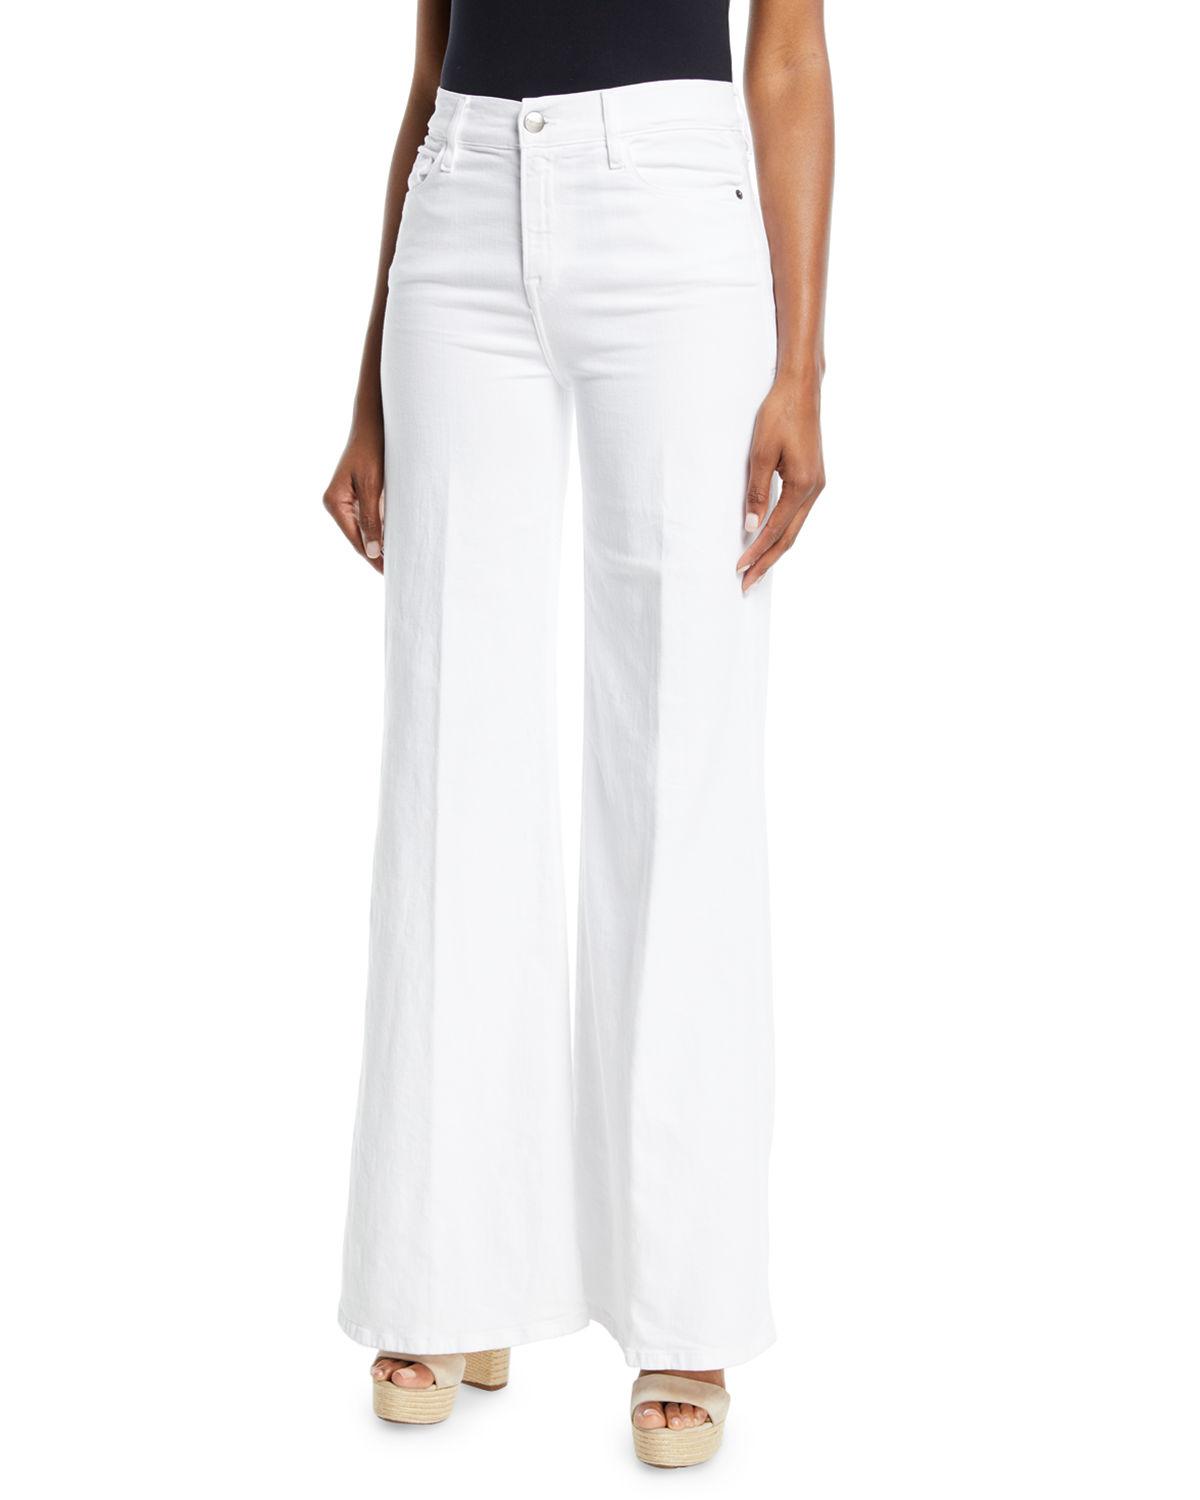 FRAME Denim Le Palazzo High-rise Wide-leg Pants in White - Lyst